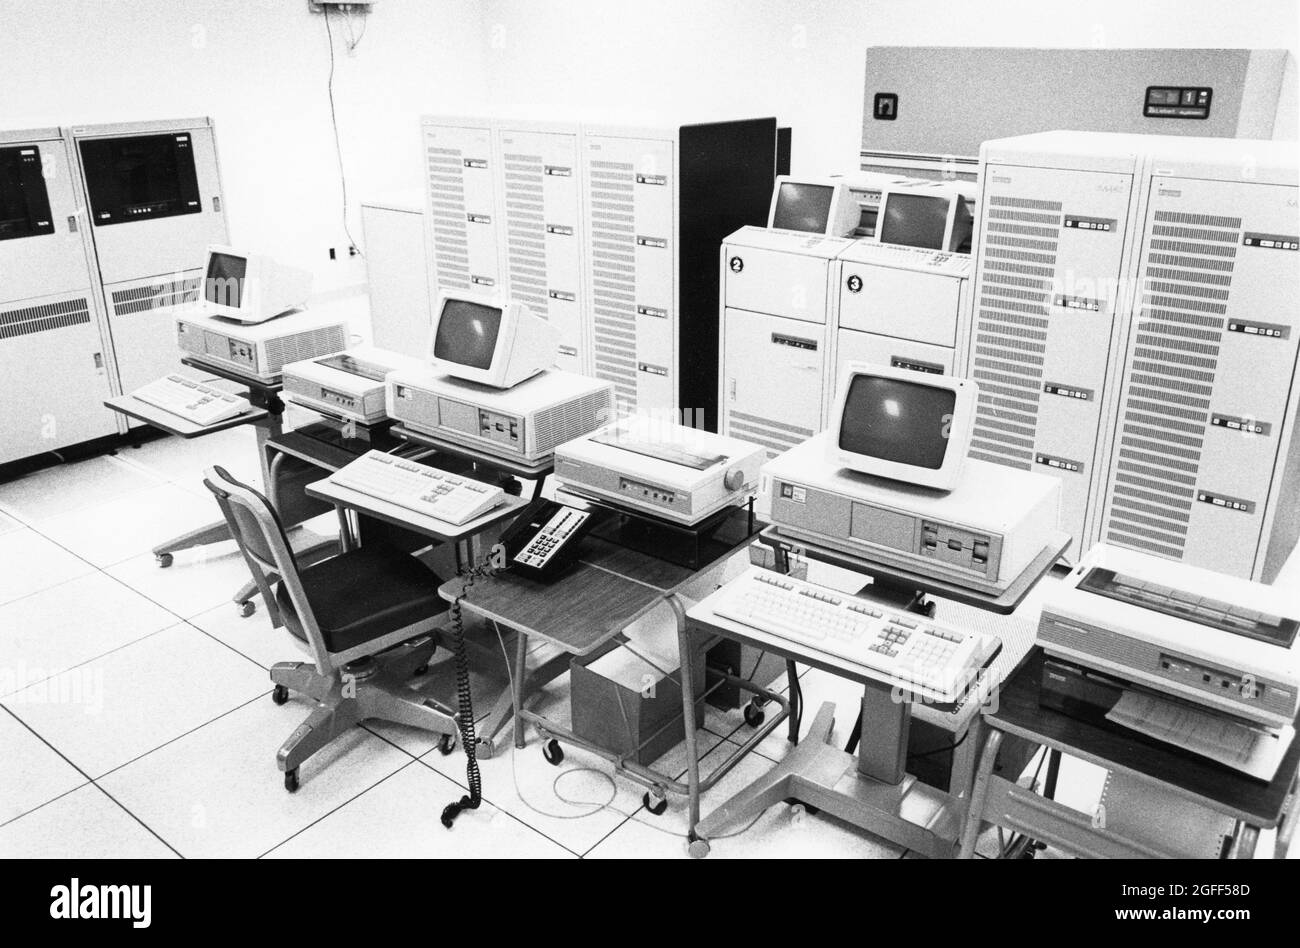 Austin Texas USA, 1990: Desktop computer terminals, printers, and a bank of mainframe computers are ready for data entry at a United States Census data processing facility during the decennial count of people living in the country. ©Bob Daemmrich Stock Photo